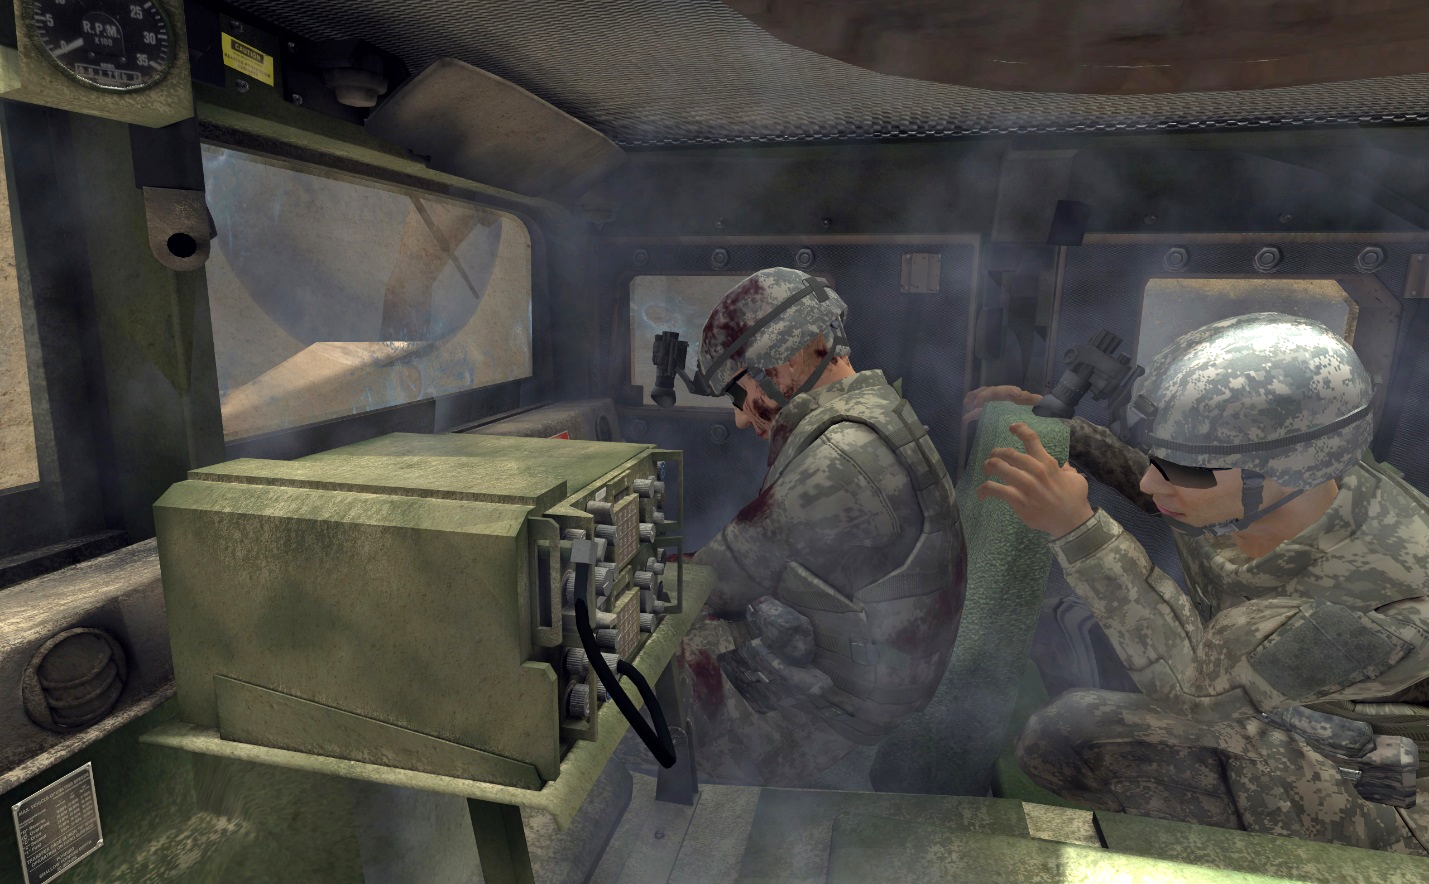 Screen shot from the video game Bravemind, showing two soldiers in the interior of a Humvee, one with blood on his uniform